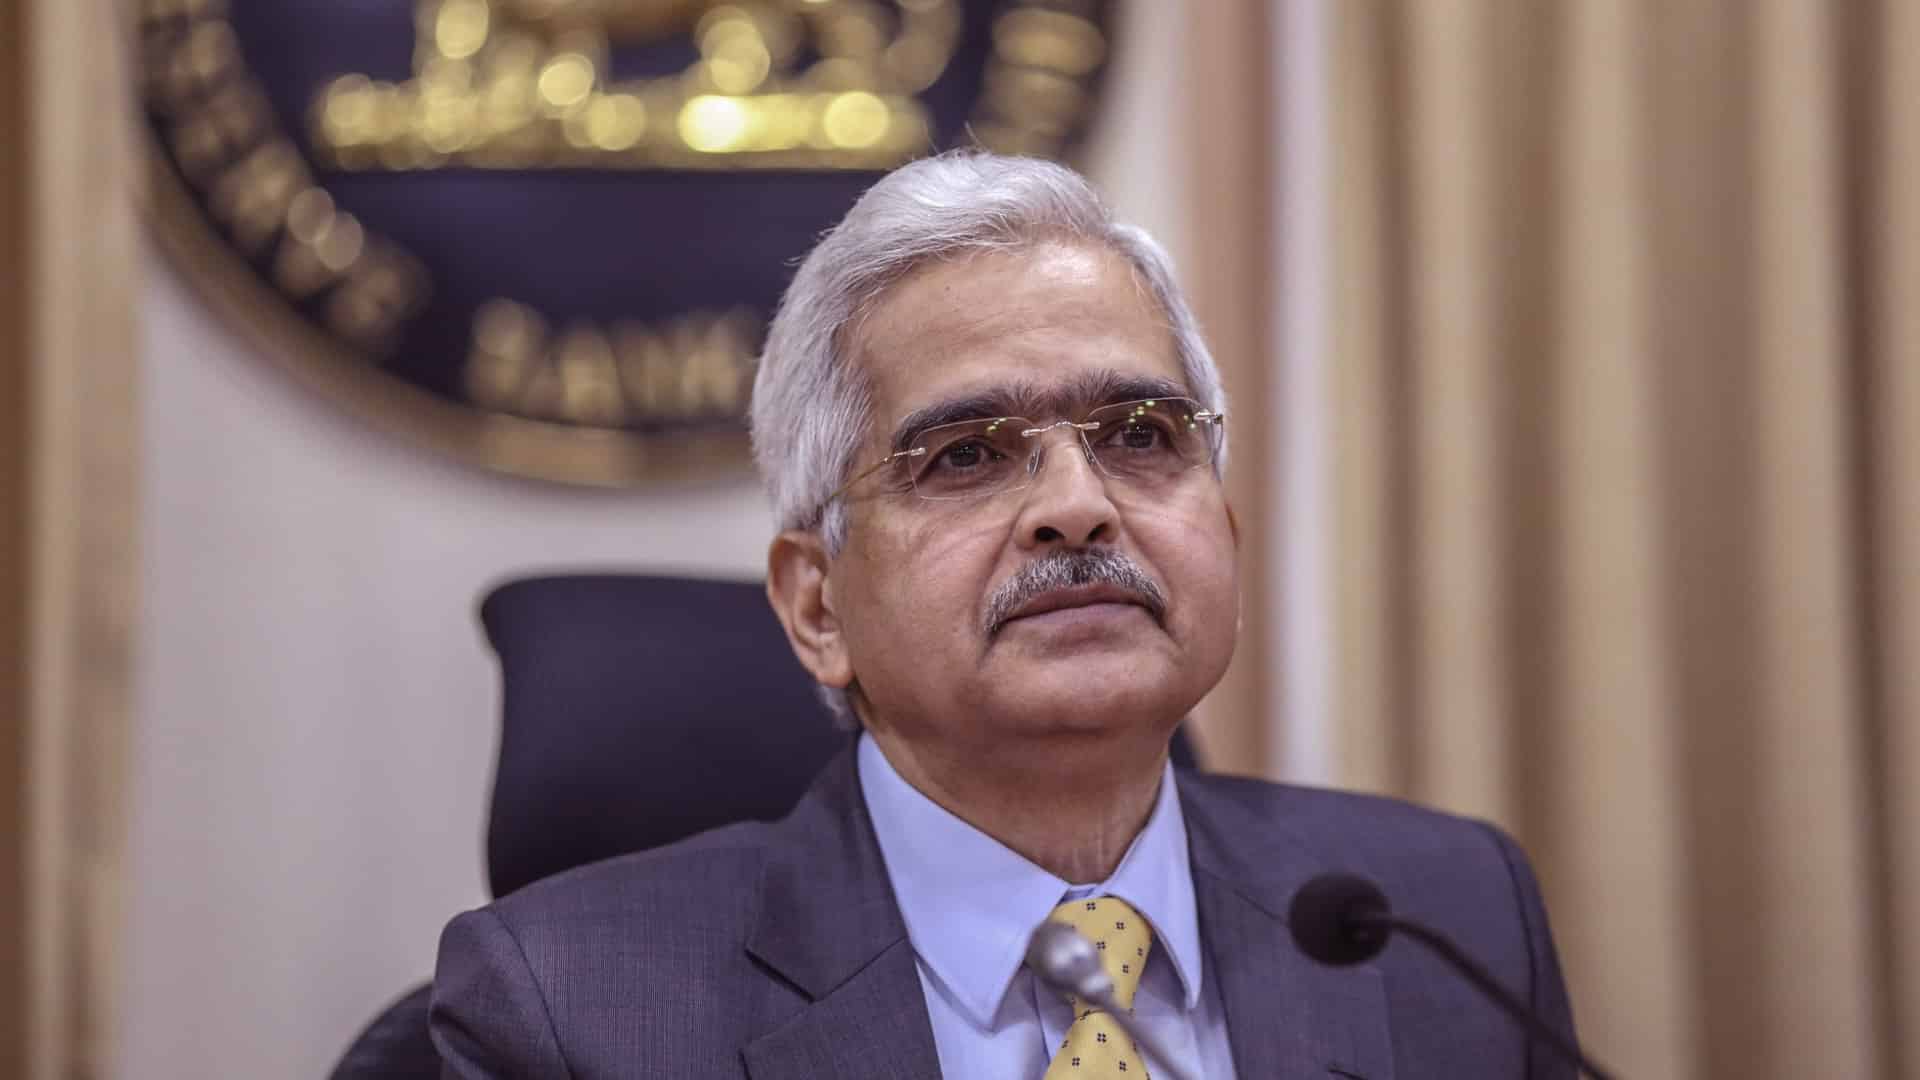 In sequence of priorities now, RBI shifts focus to inflation over growth: Das